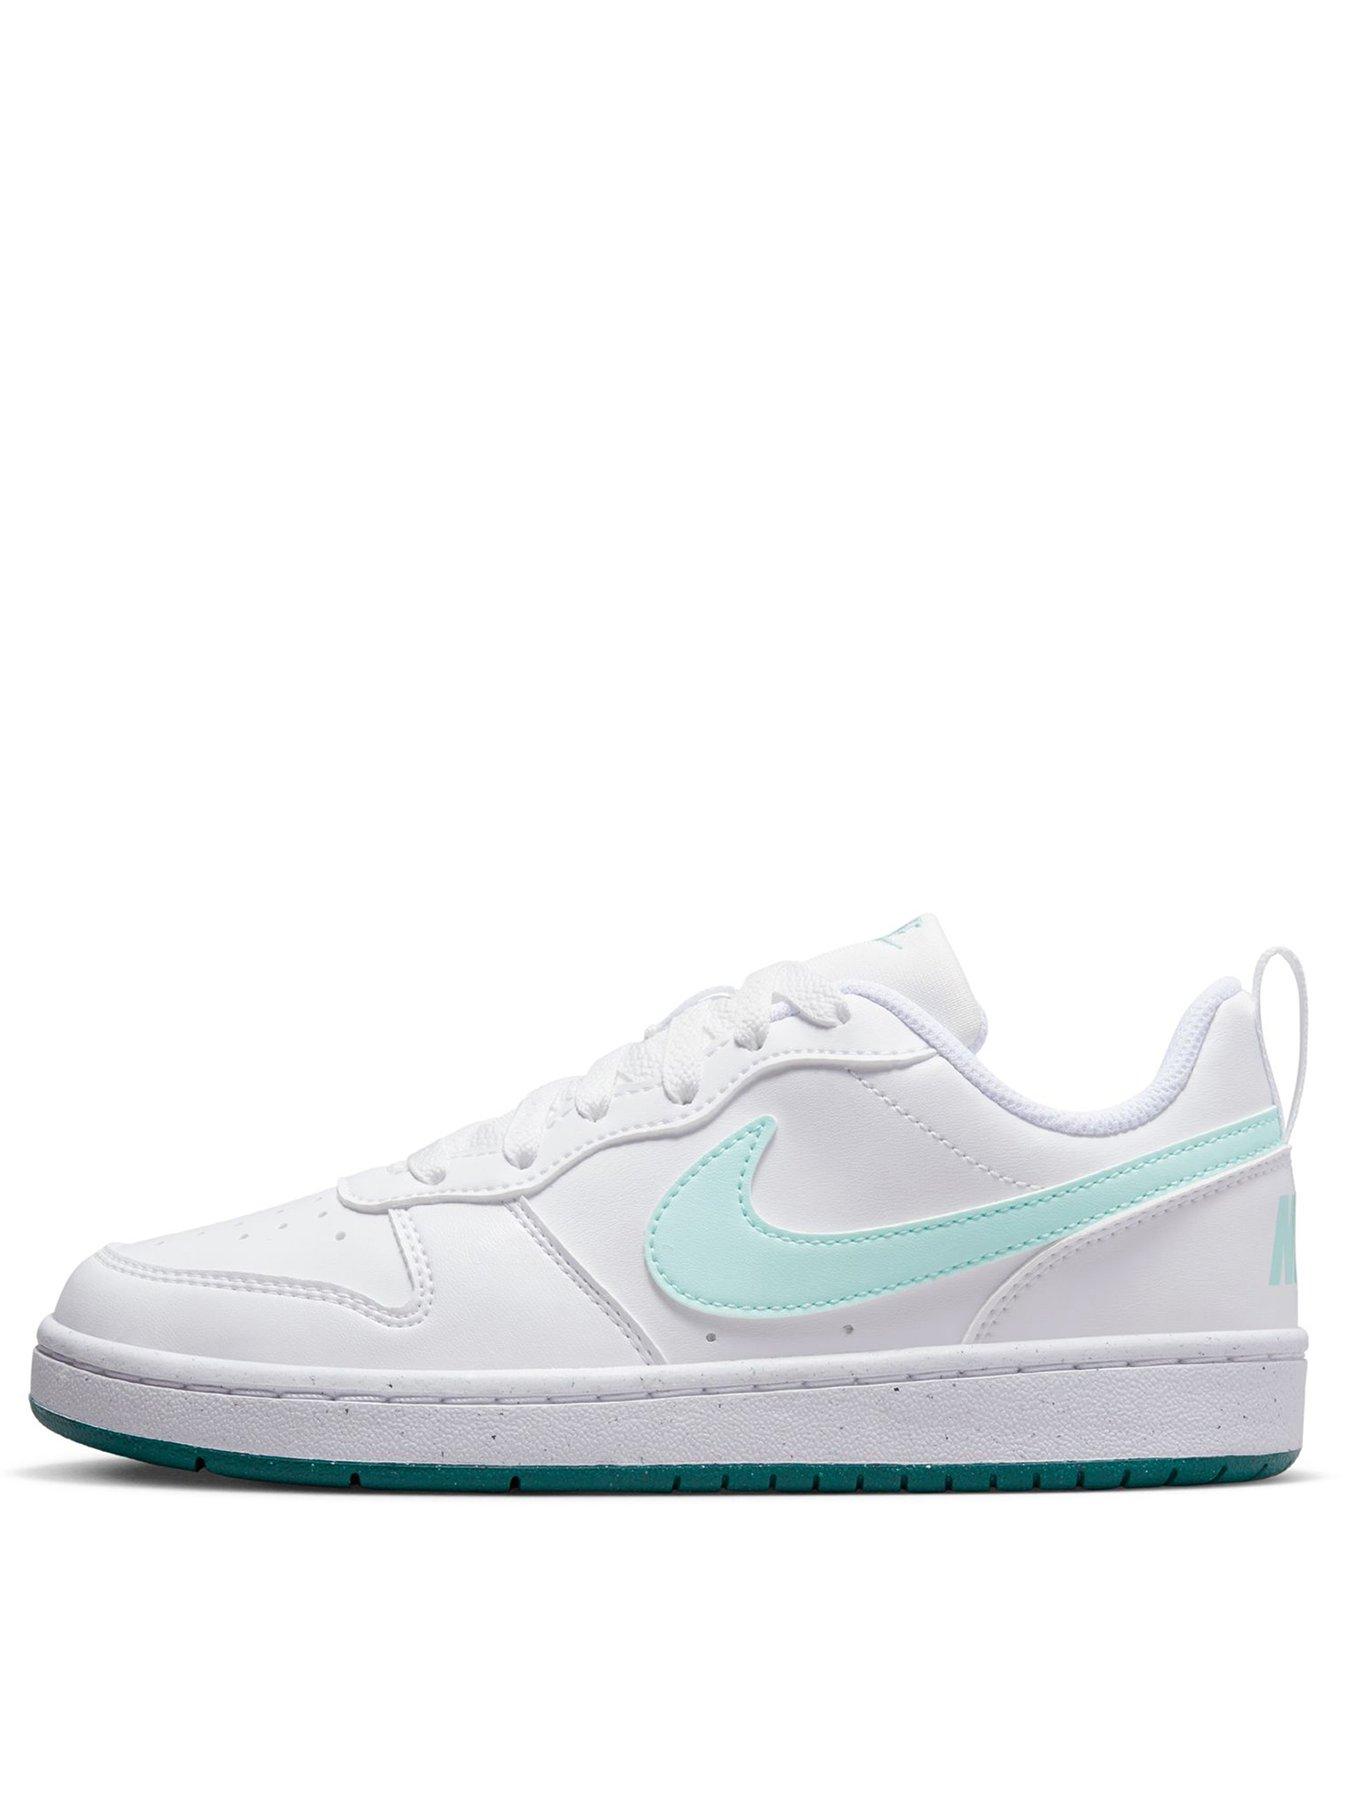 Nike Older Girls Court Borough Low Recraft Trainers - White/Green - Size 5 Older